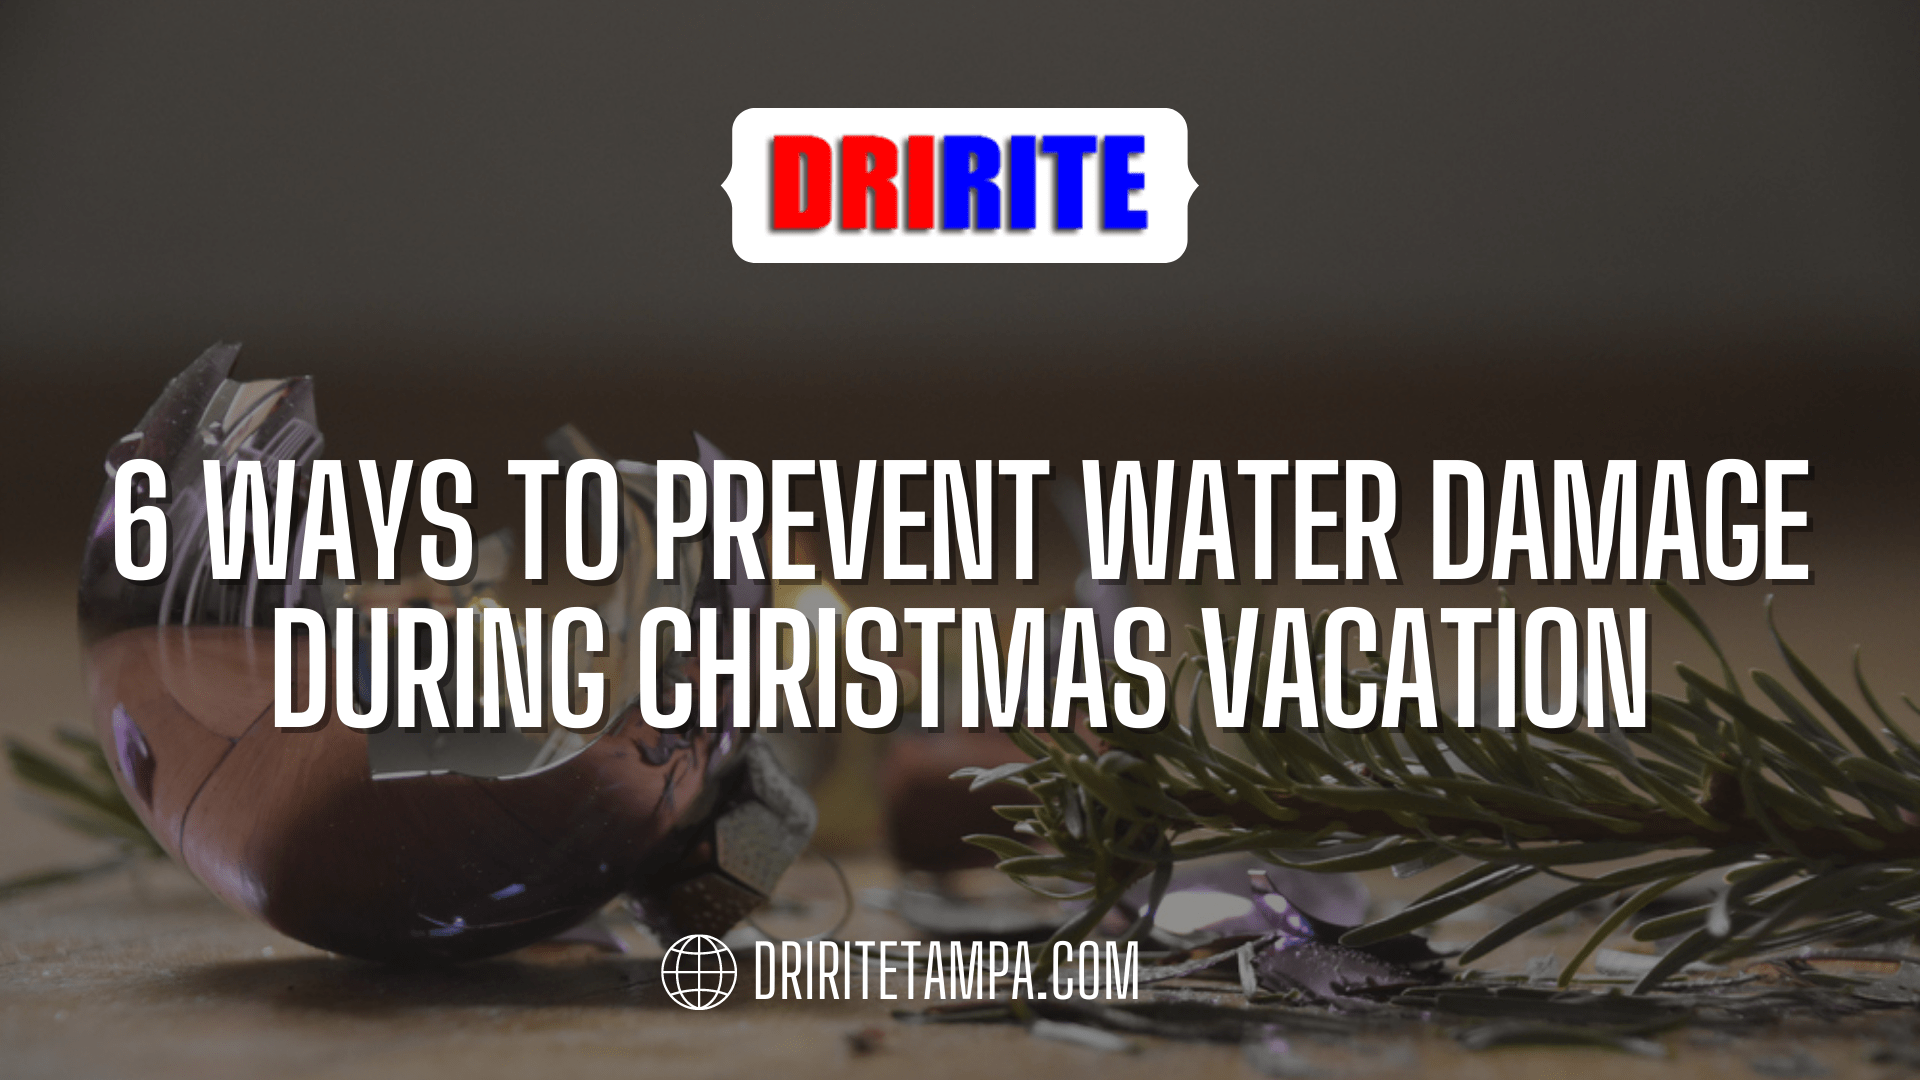 6 Ways to Prevent Water Damage During Christmas Vacation